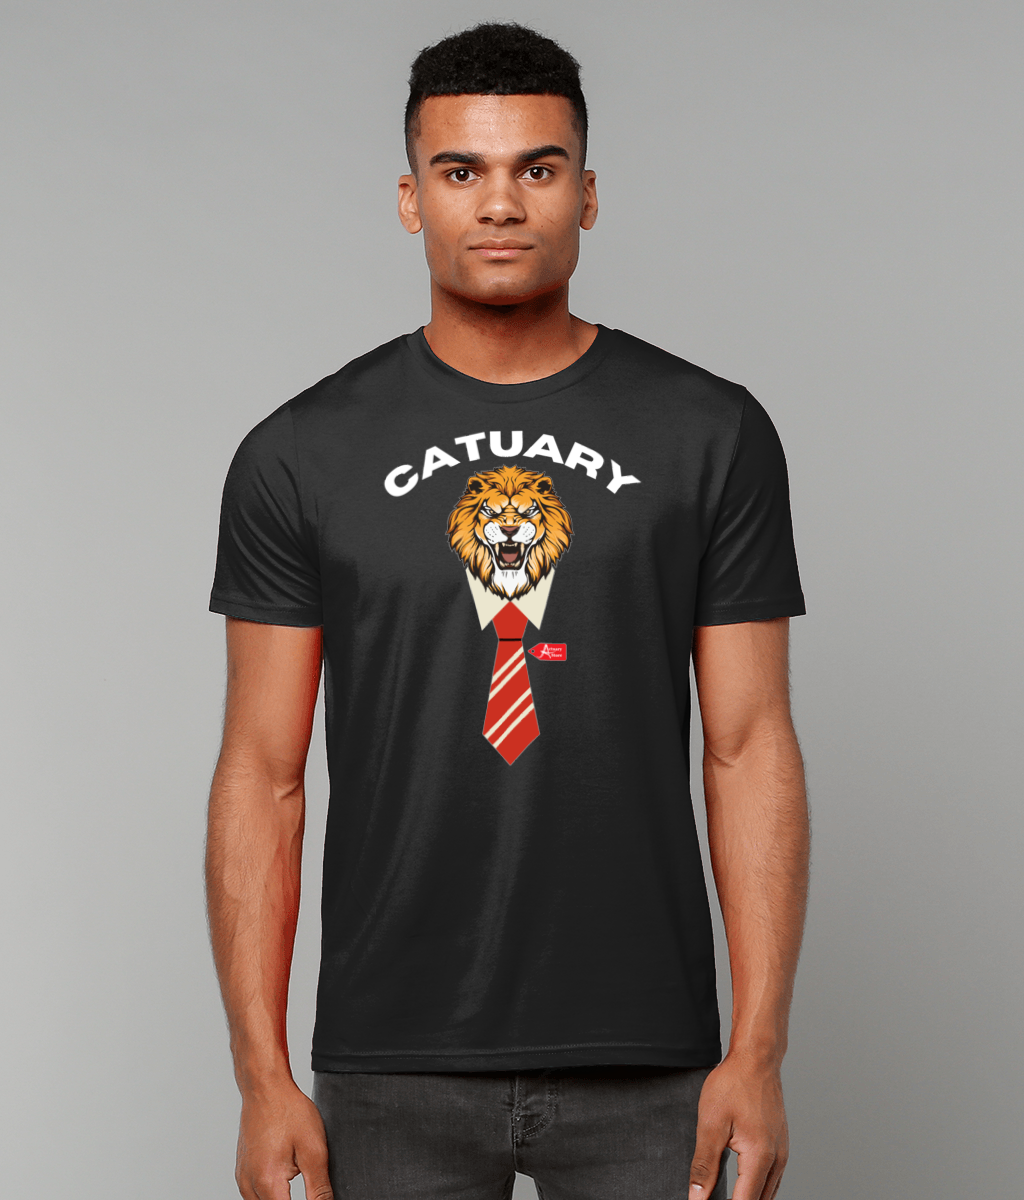 Catuary Lion in Tie T-Shirt